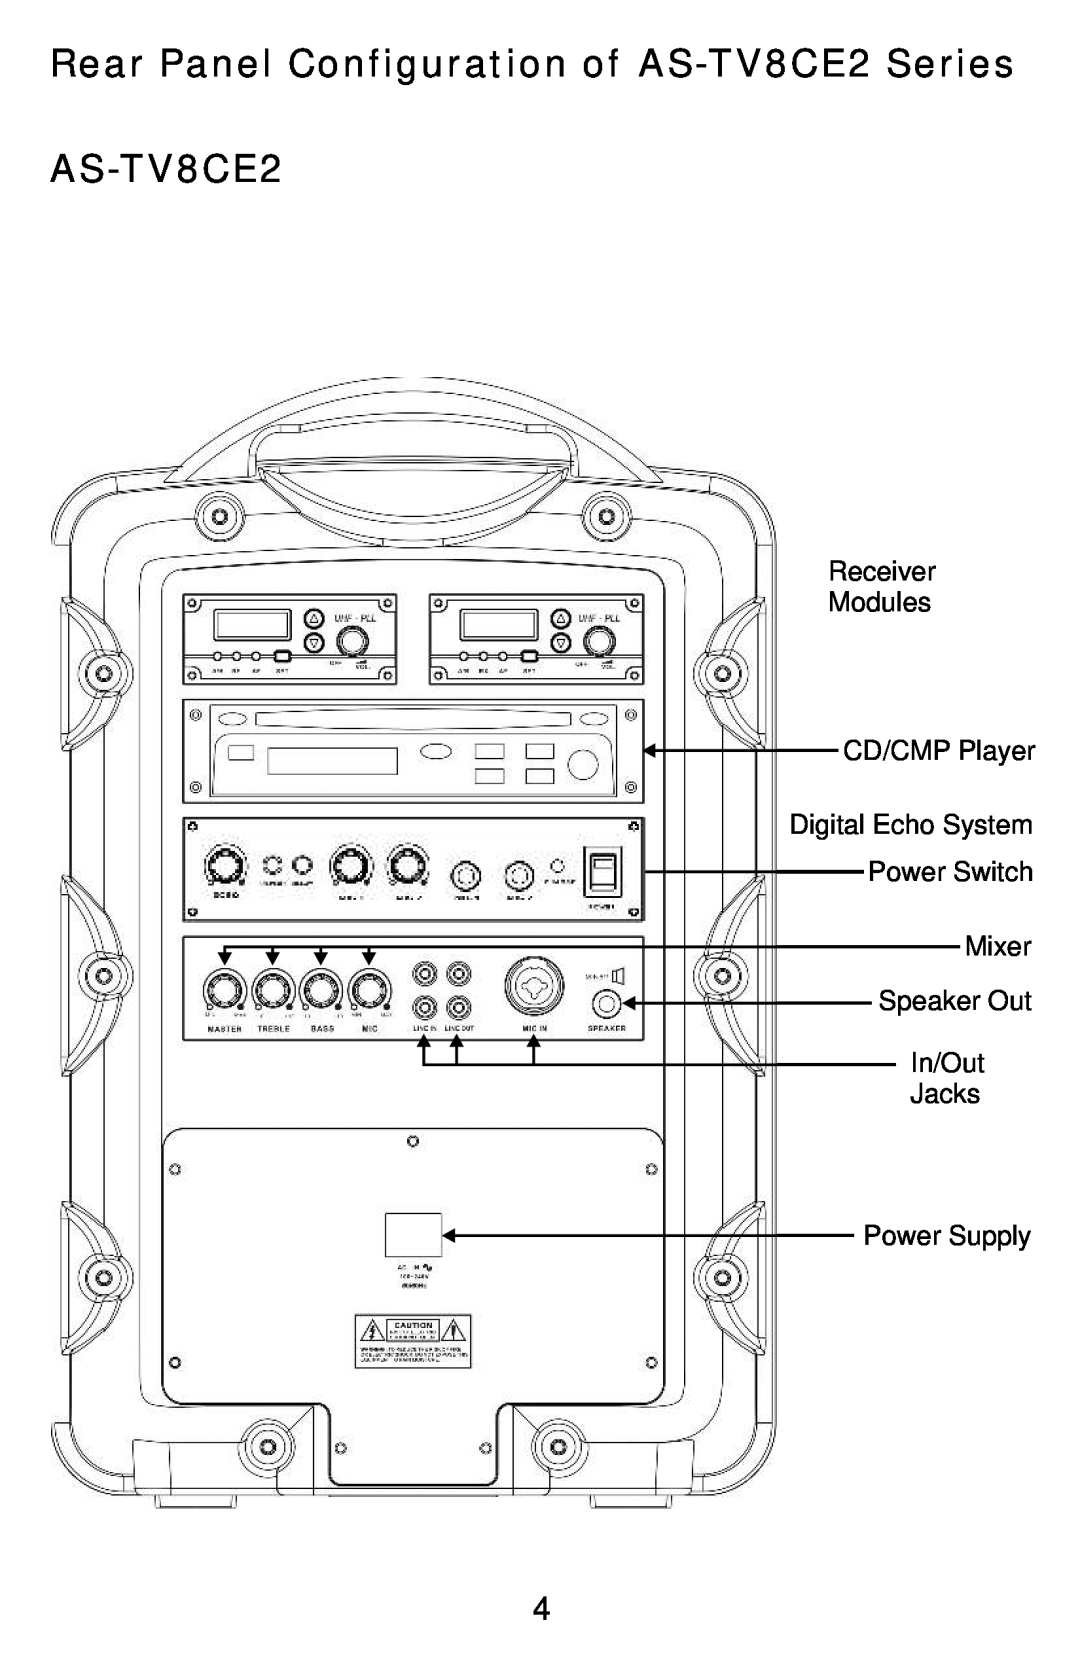 Traveler manual Rear Panel Configuration of AS-TV8CE2Series, Receiver Modules CD/CMP Player 